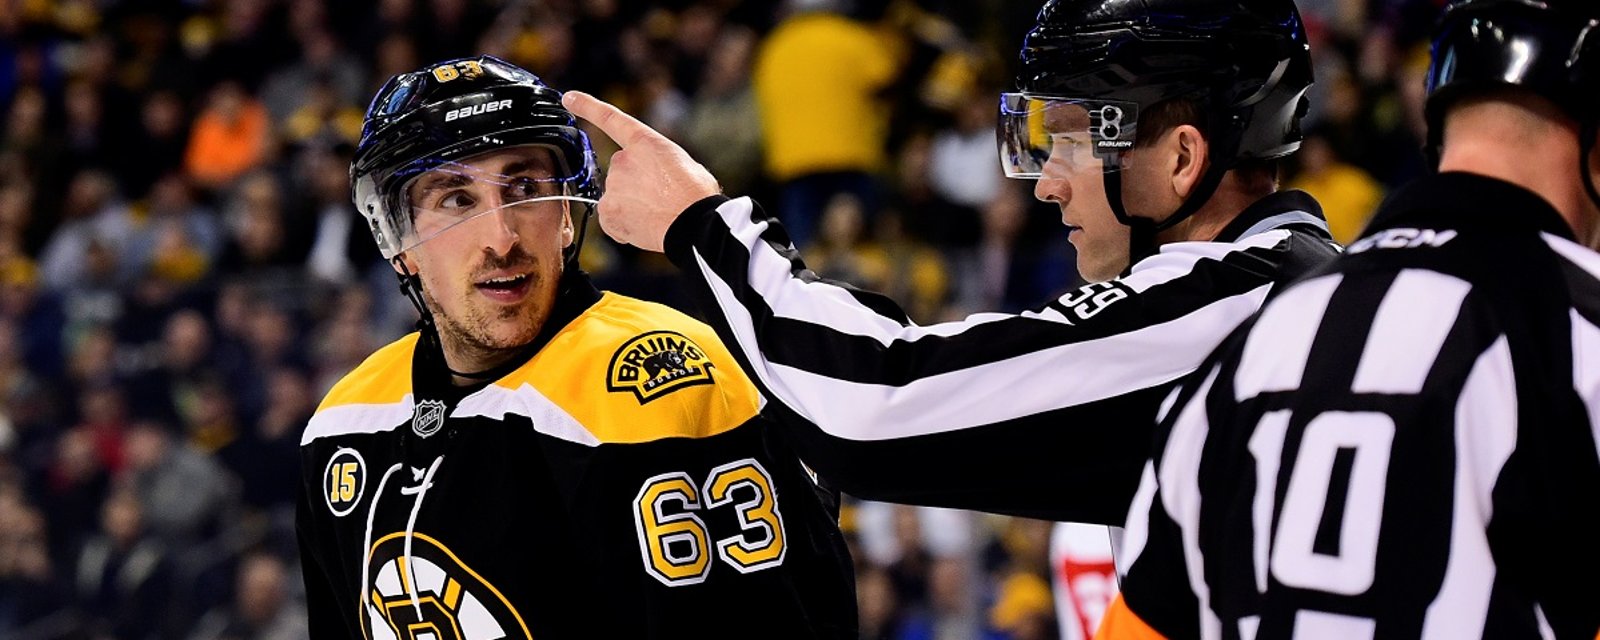 NHL Player Safety comes down on Brad Marchand.